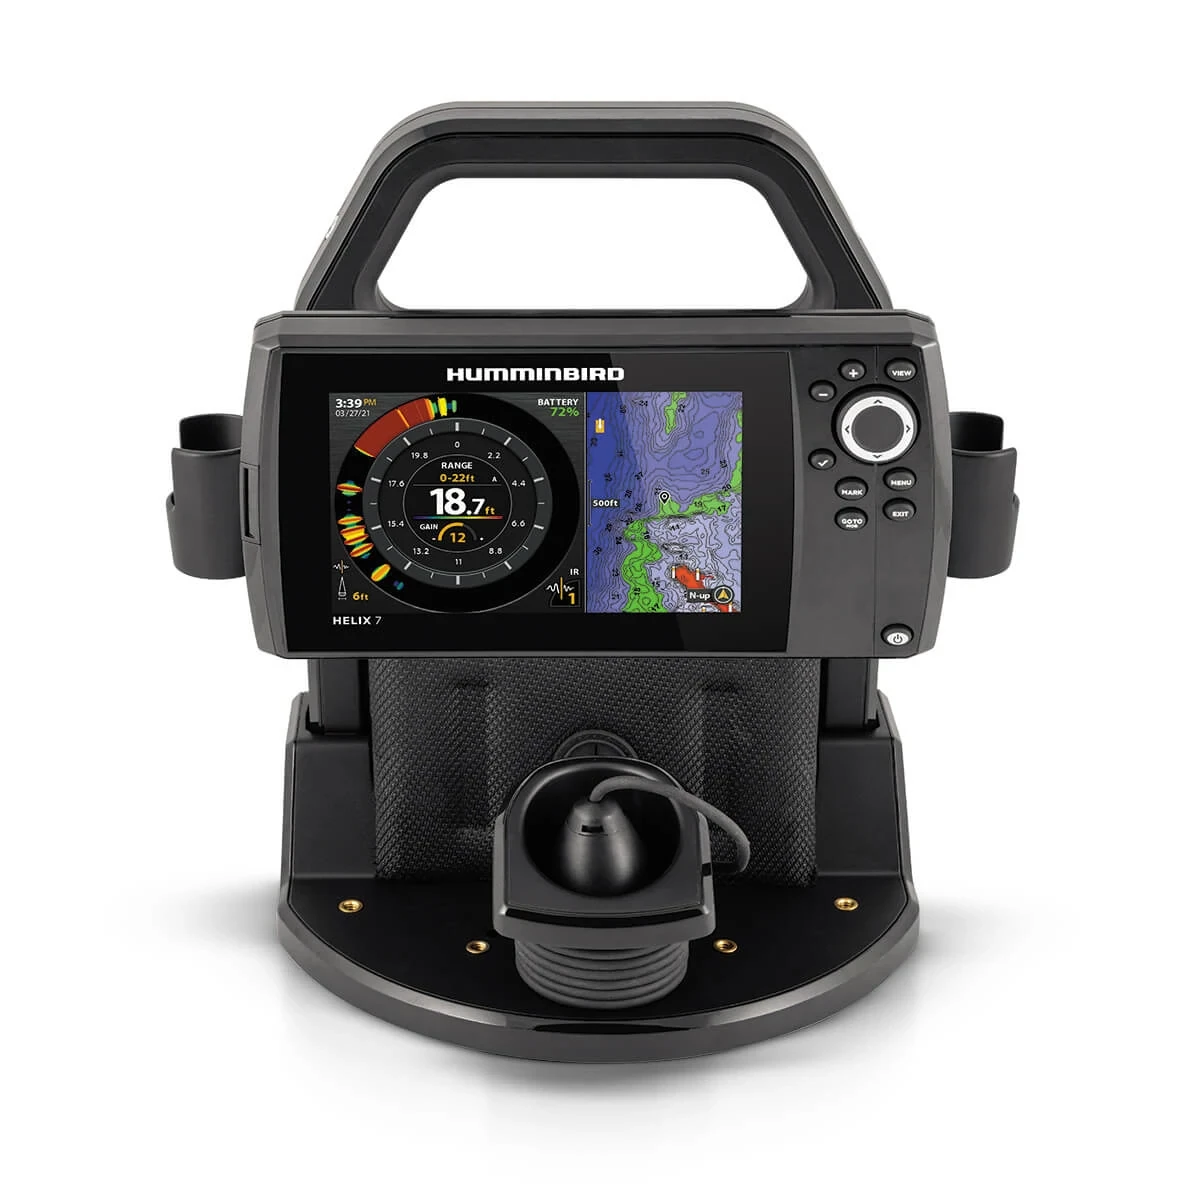 ICE HELIX 7 CHIRP GPS G4 All Season shown with the transducer tucked into the built-in tray in the shuttle